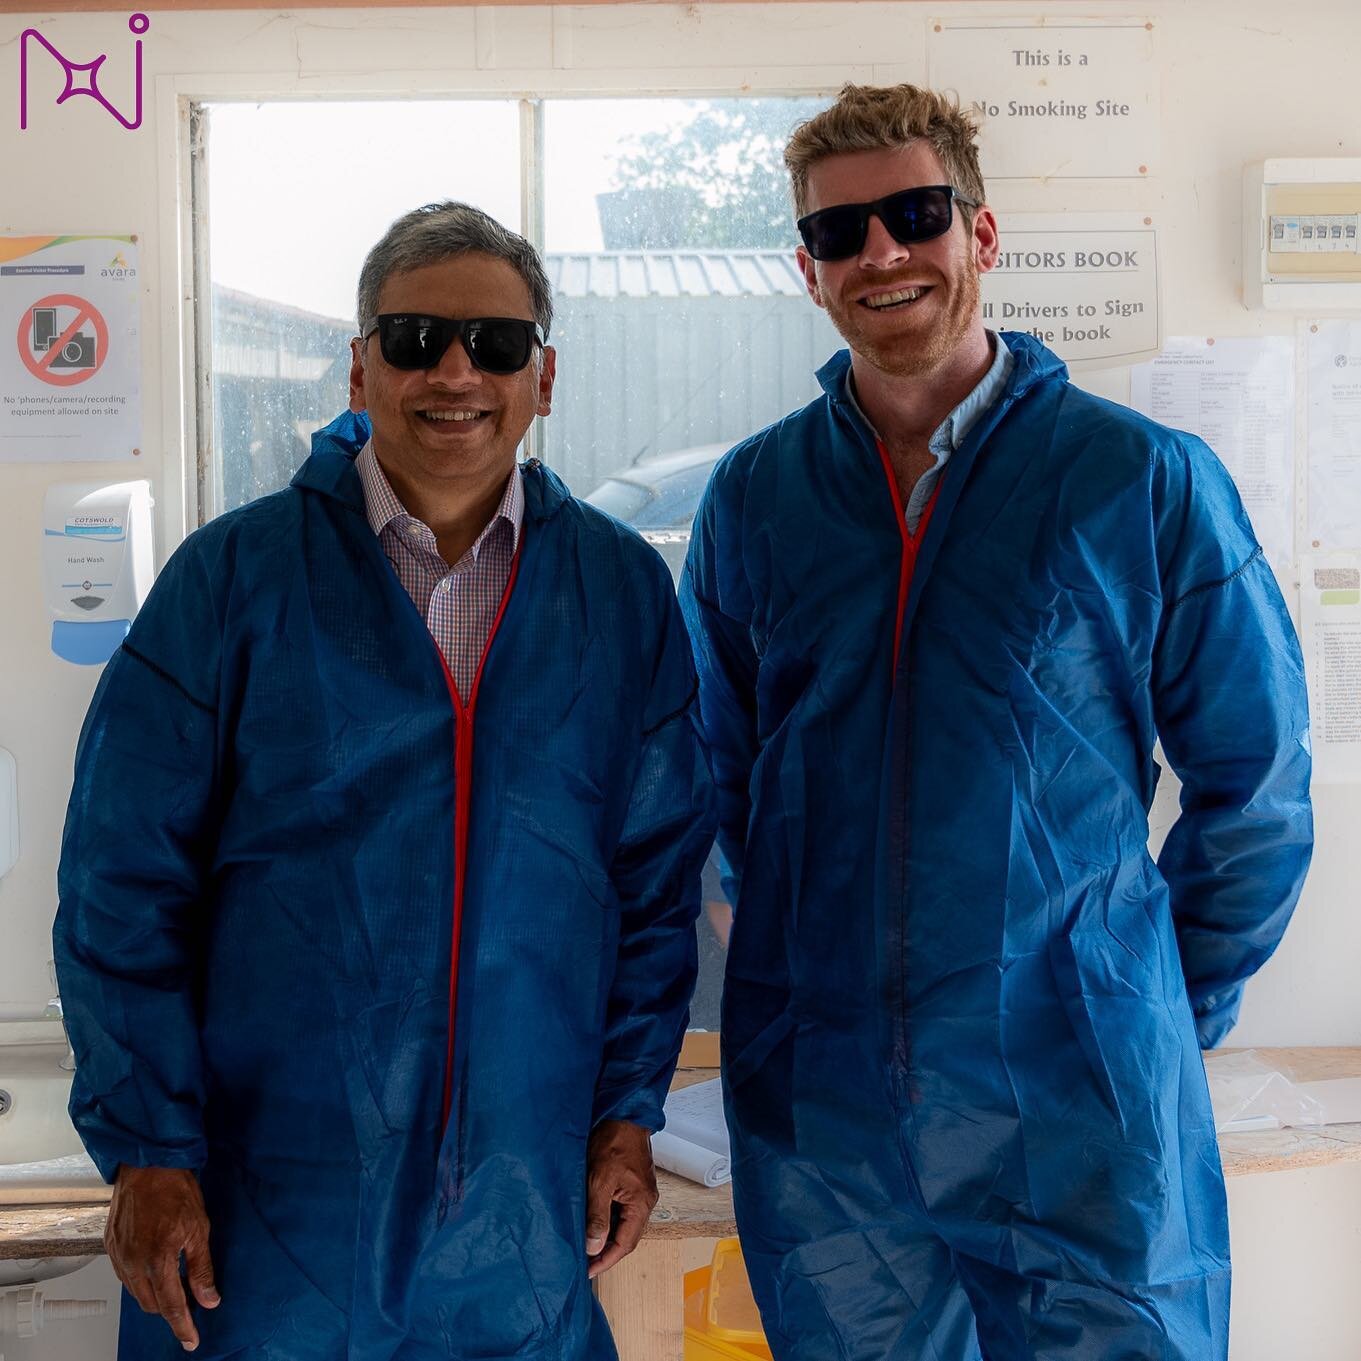 Dan Ward and Jyoti Banerjee don some protective suits for their visit to a bio secure poultry farm - Wye-Usk Transition Lab #wyeusktransitionlab #northstartransition